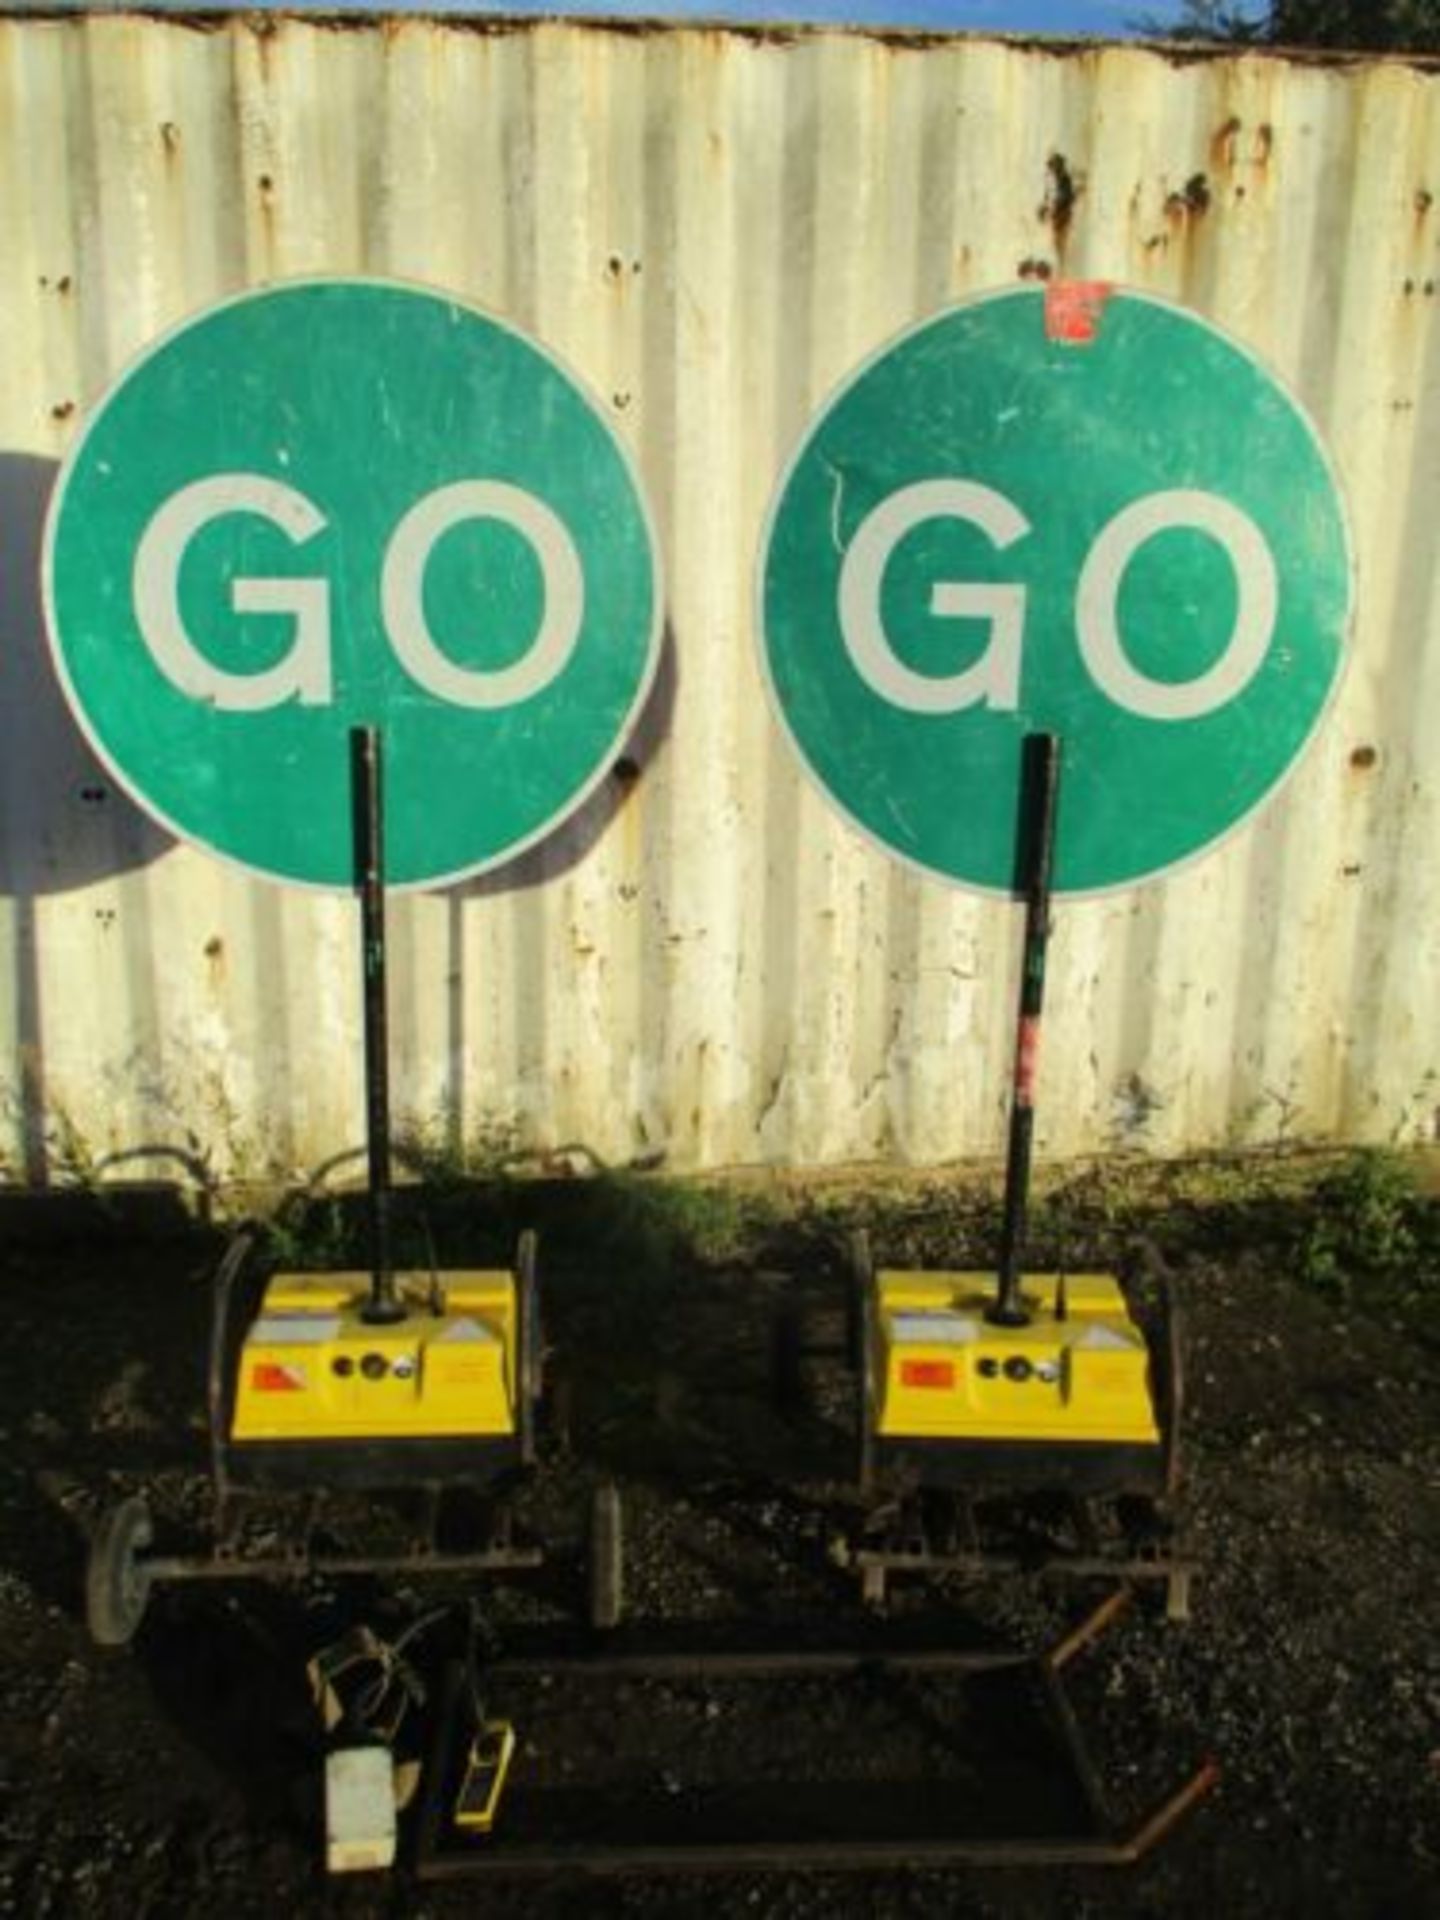 PIKE ROBOSIGN STOP GO BOARDS TRAFFIC LIGHTS SIGN LIGHT BATTERY 2 WAY - Image 2 of 4